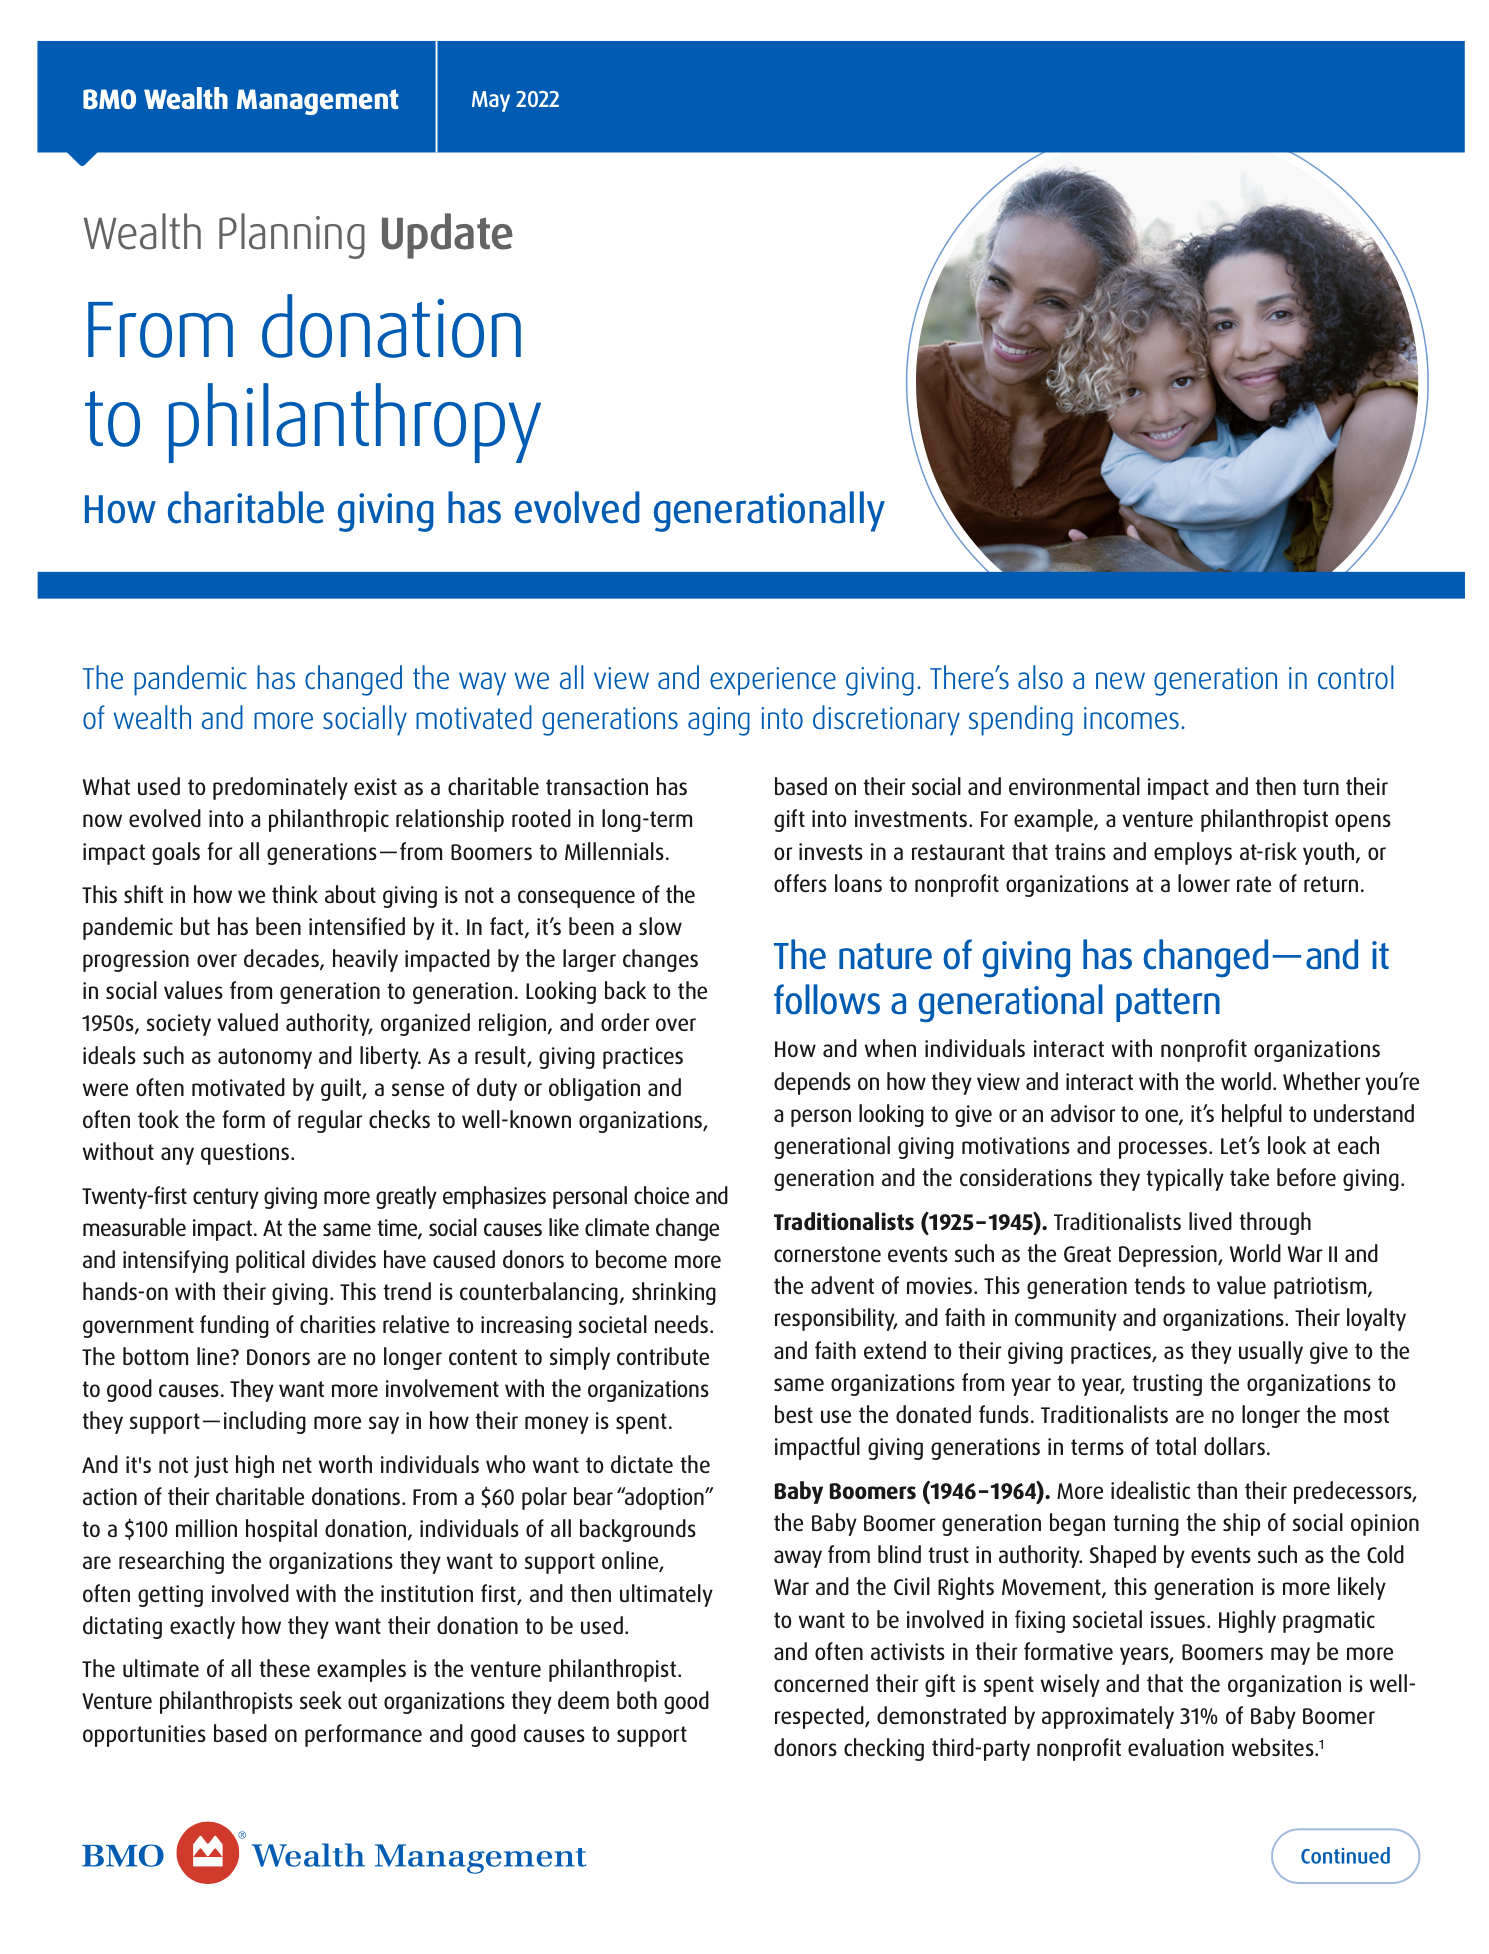 From Donation to Philanthropy - BMO Wealth Management